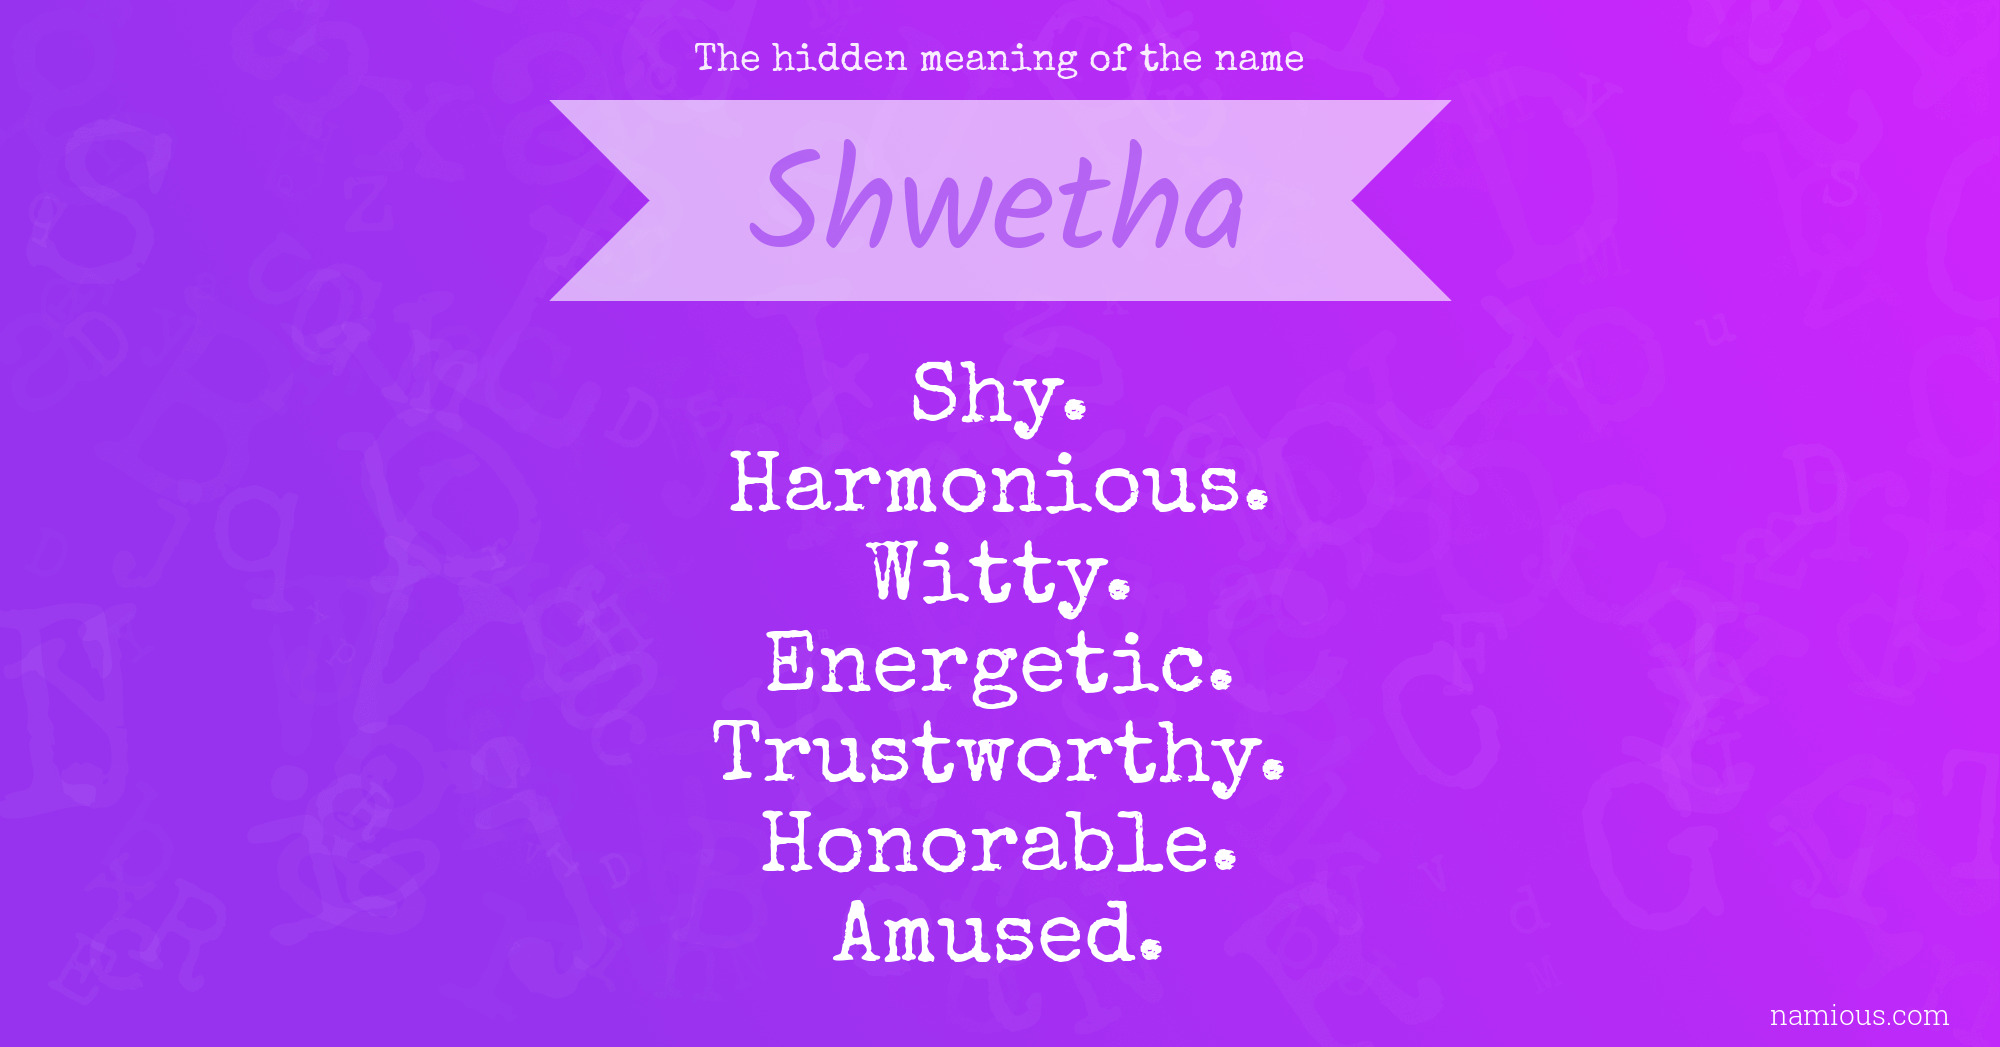 The hidden meaning of the name Shwetha